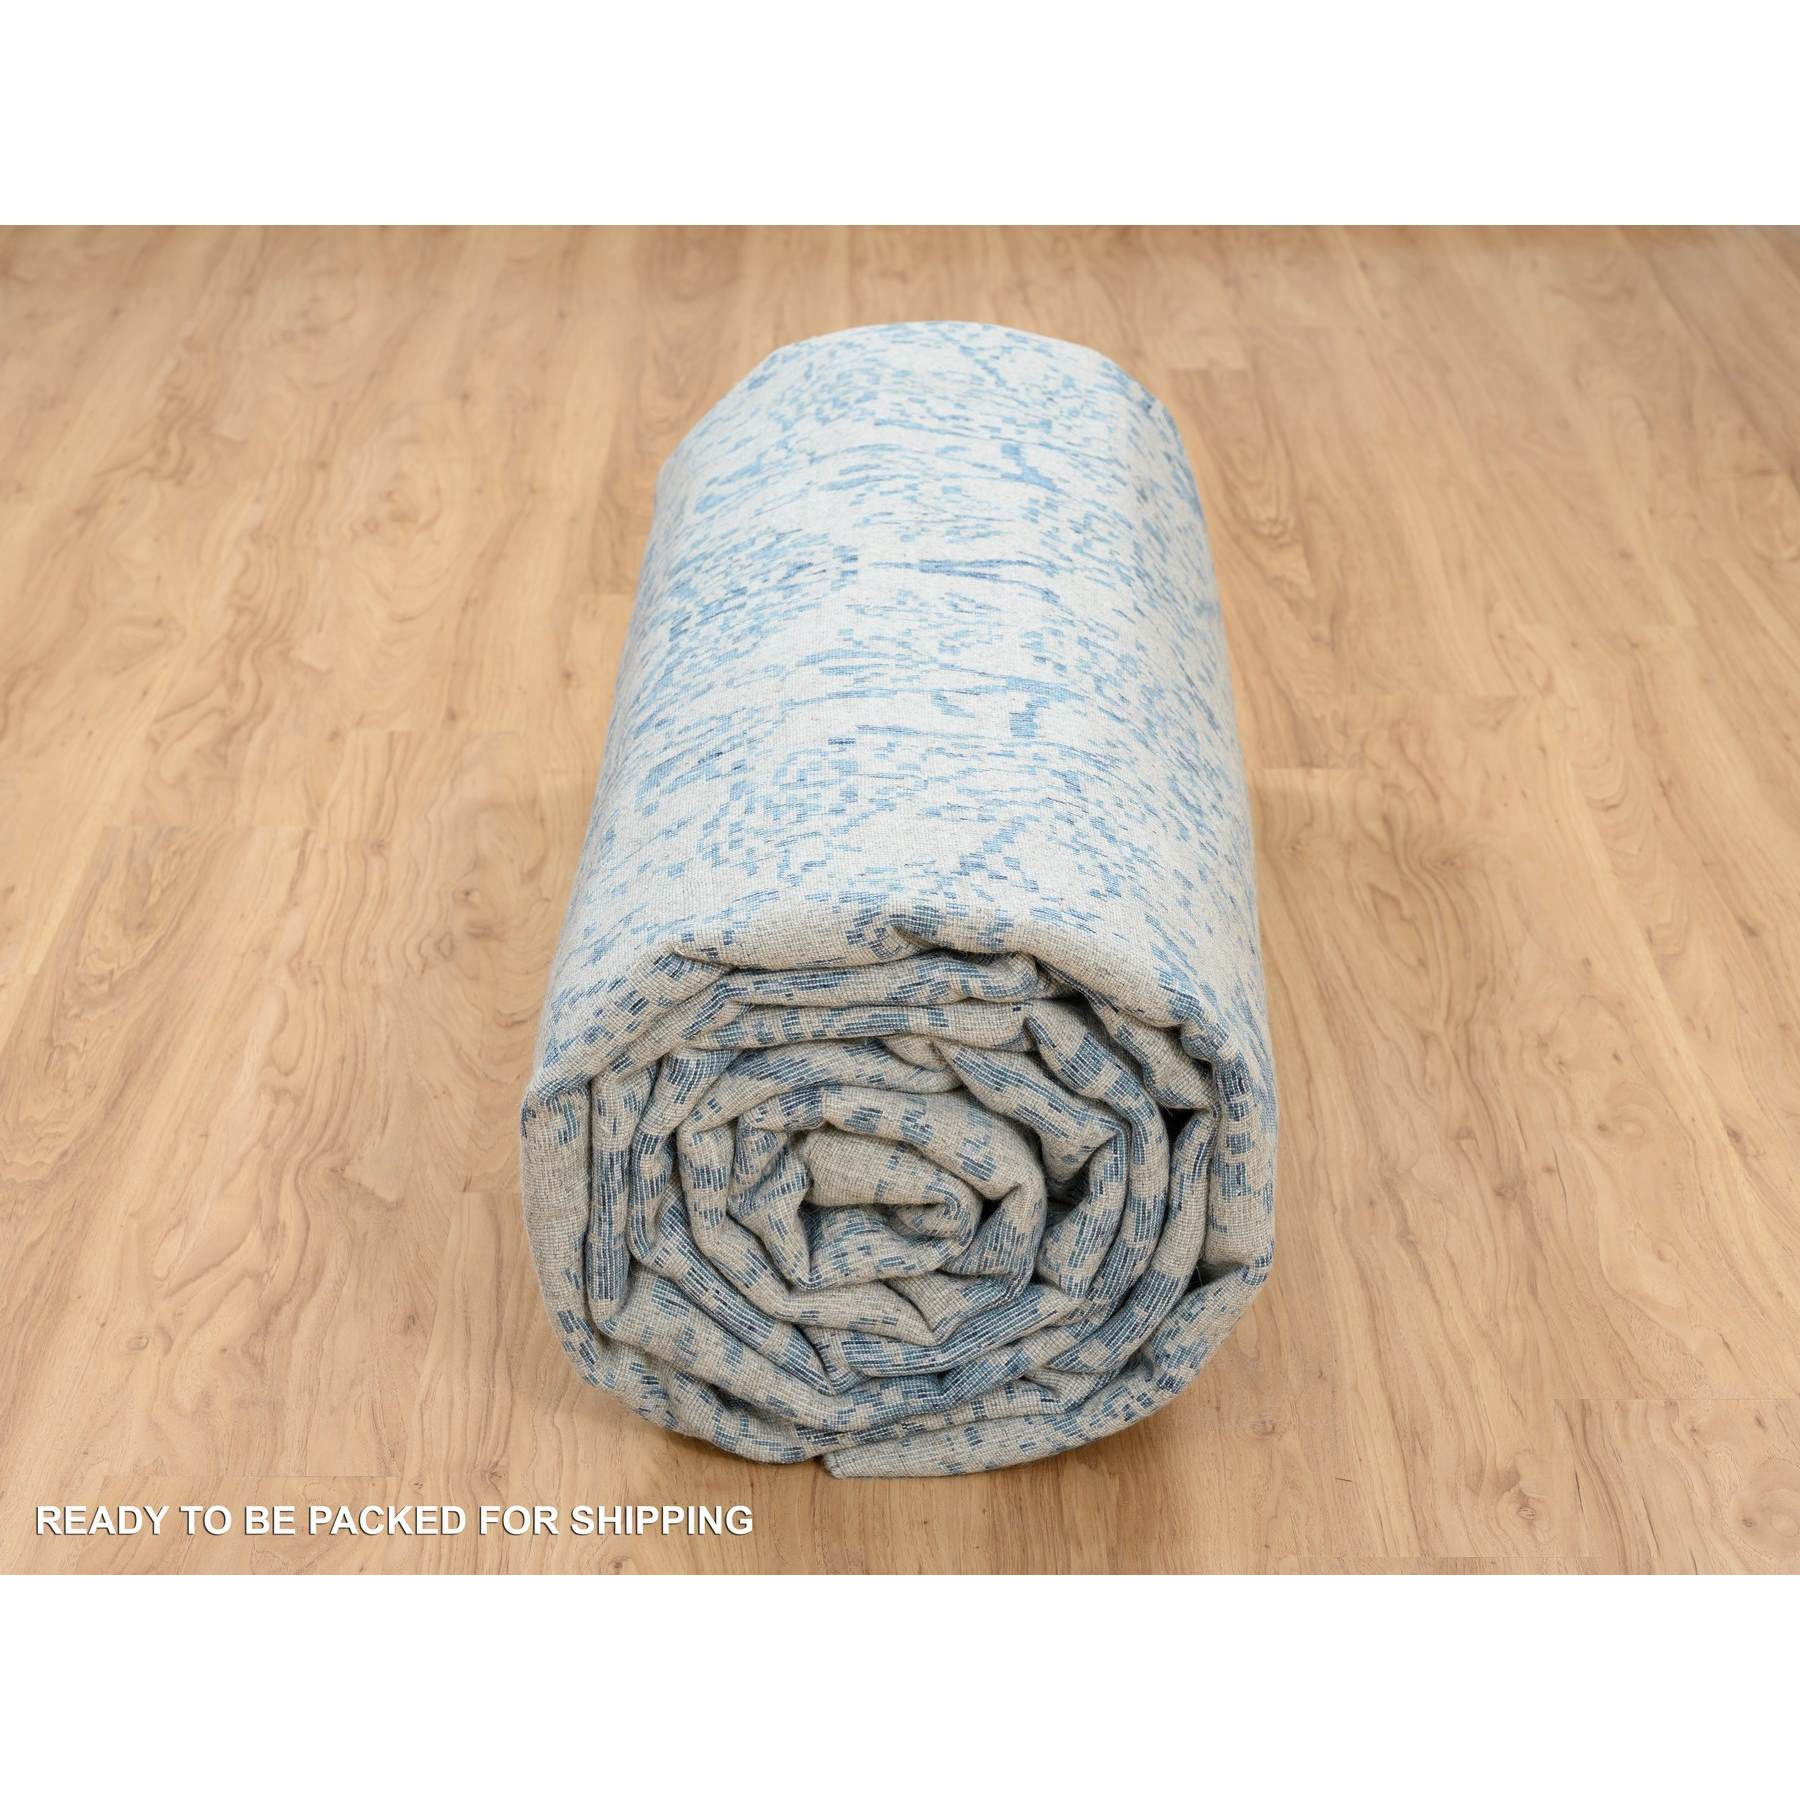 Transitional-Hand-Loomed-Rug-319115